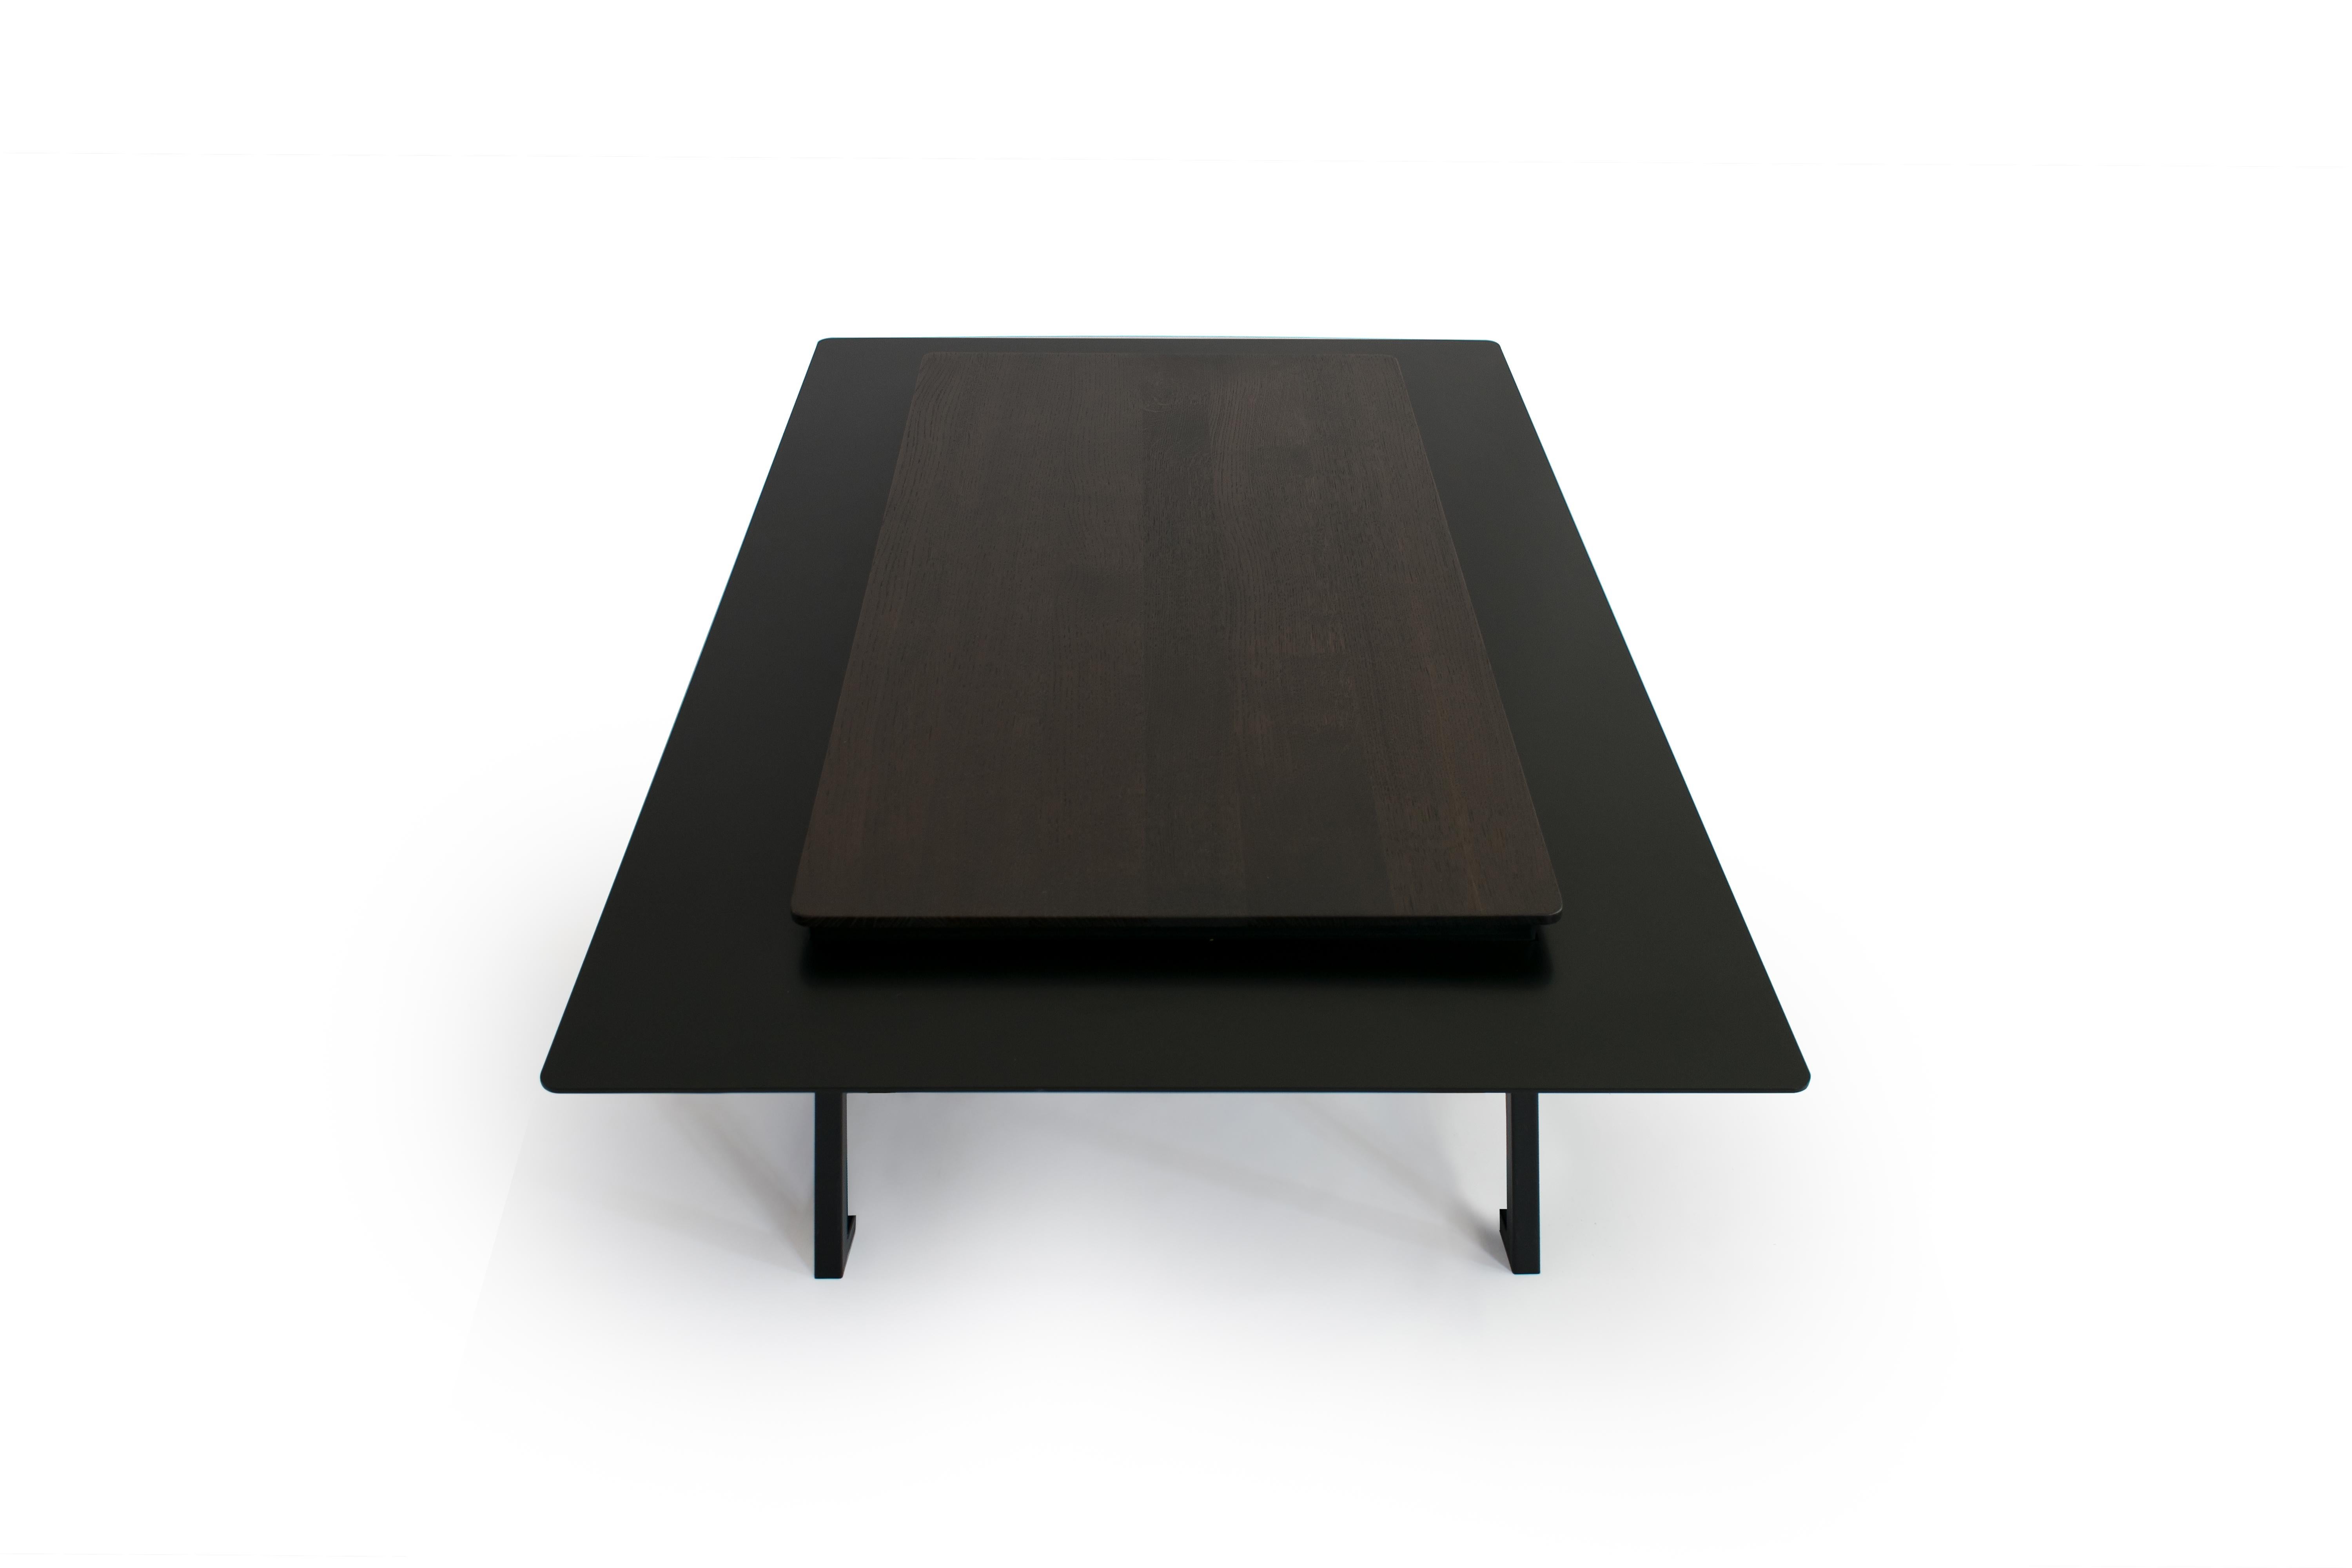 Tungen Coffee Table, Jan Garncarek
Materials: Steel, wood.
Dimensions: 33 x 130 x 80 cm.
Weight: 60 kg

The table consists of a wood top with a metal collar. This will enable the separation of everyday objects from those, that we want to expose on